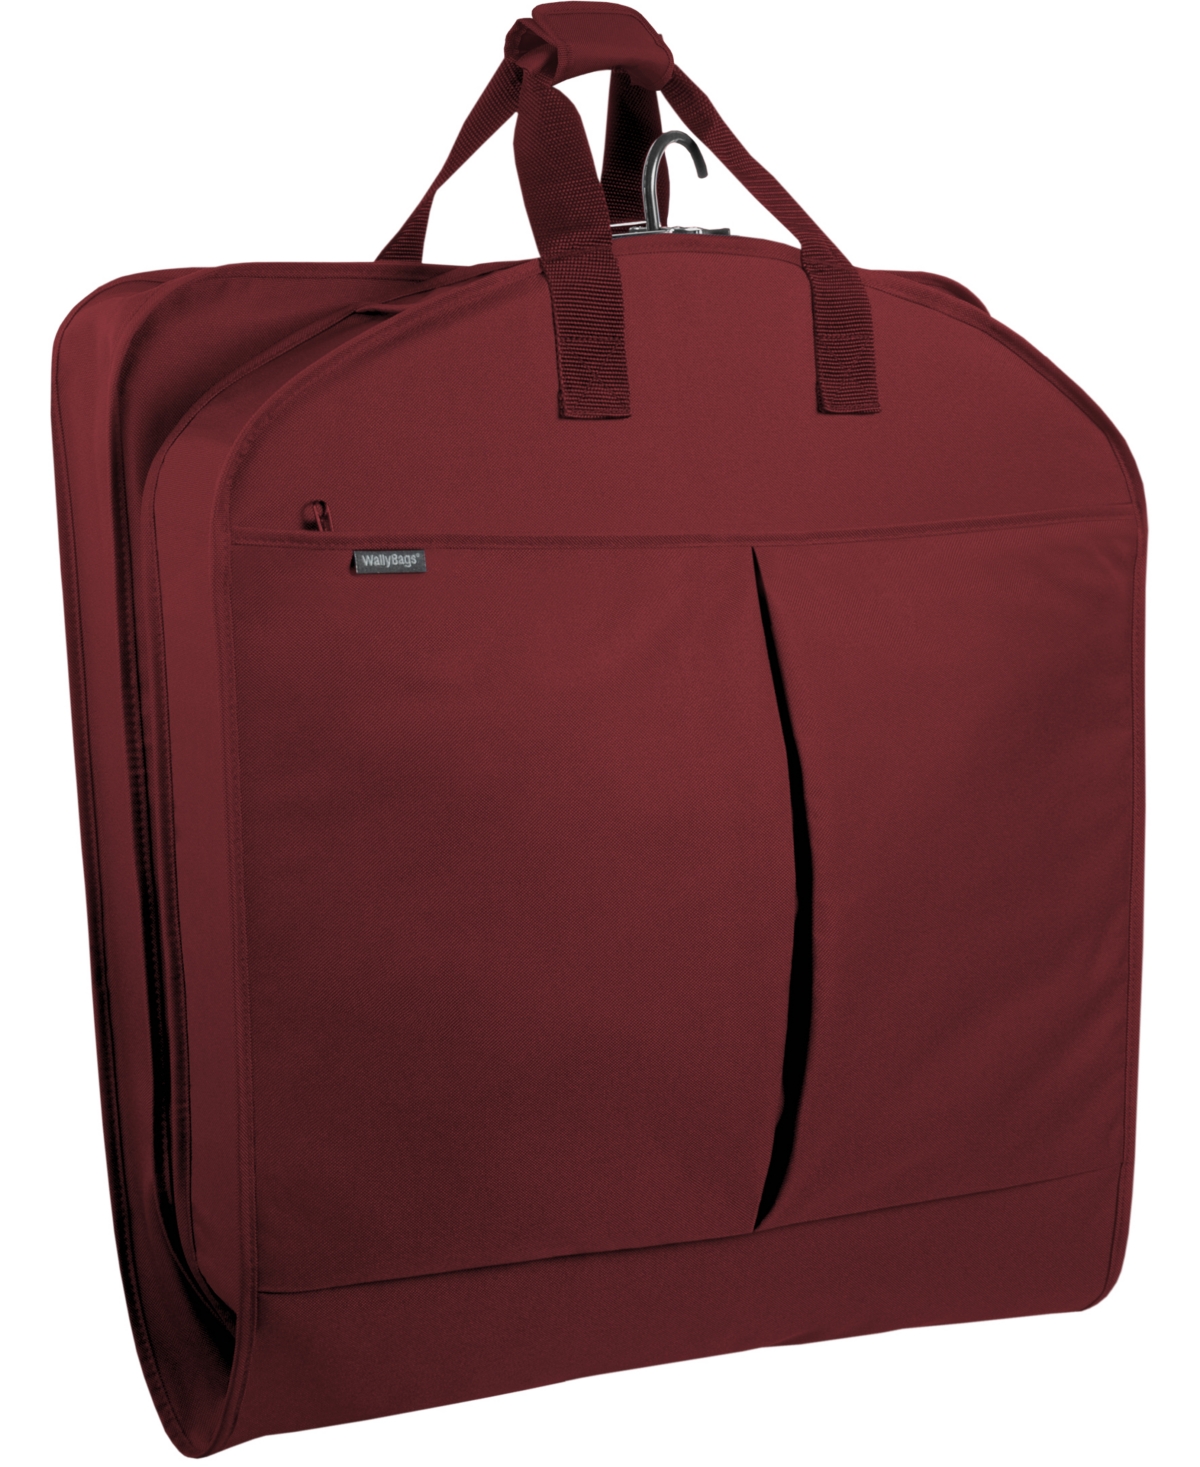 Wallybags 45" Deluxe Extra Capacity Travel Garment Bag With Accessory Pockets In Merlot